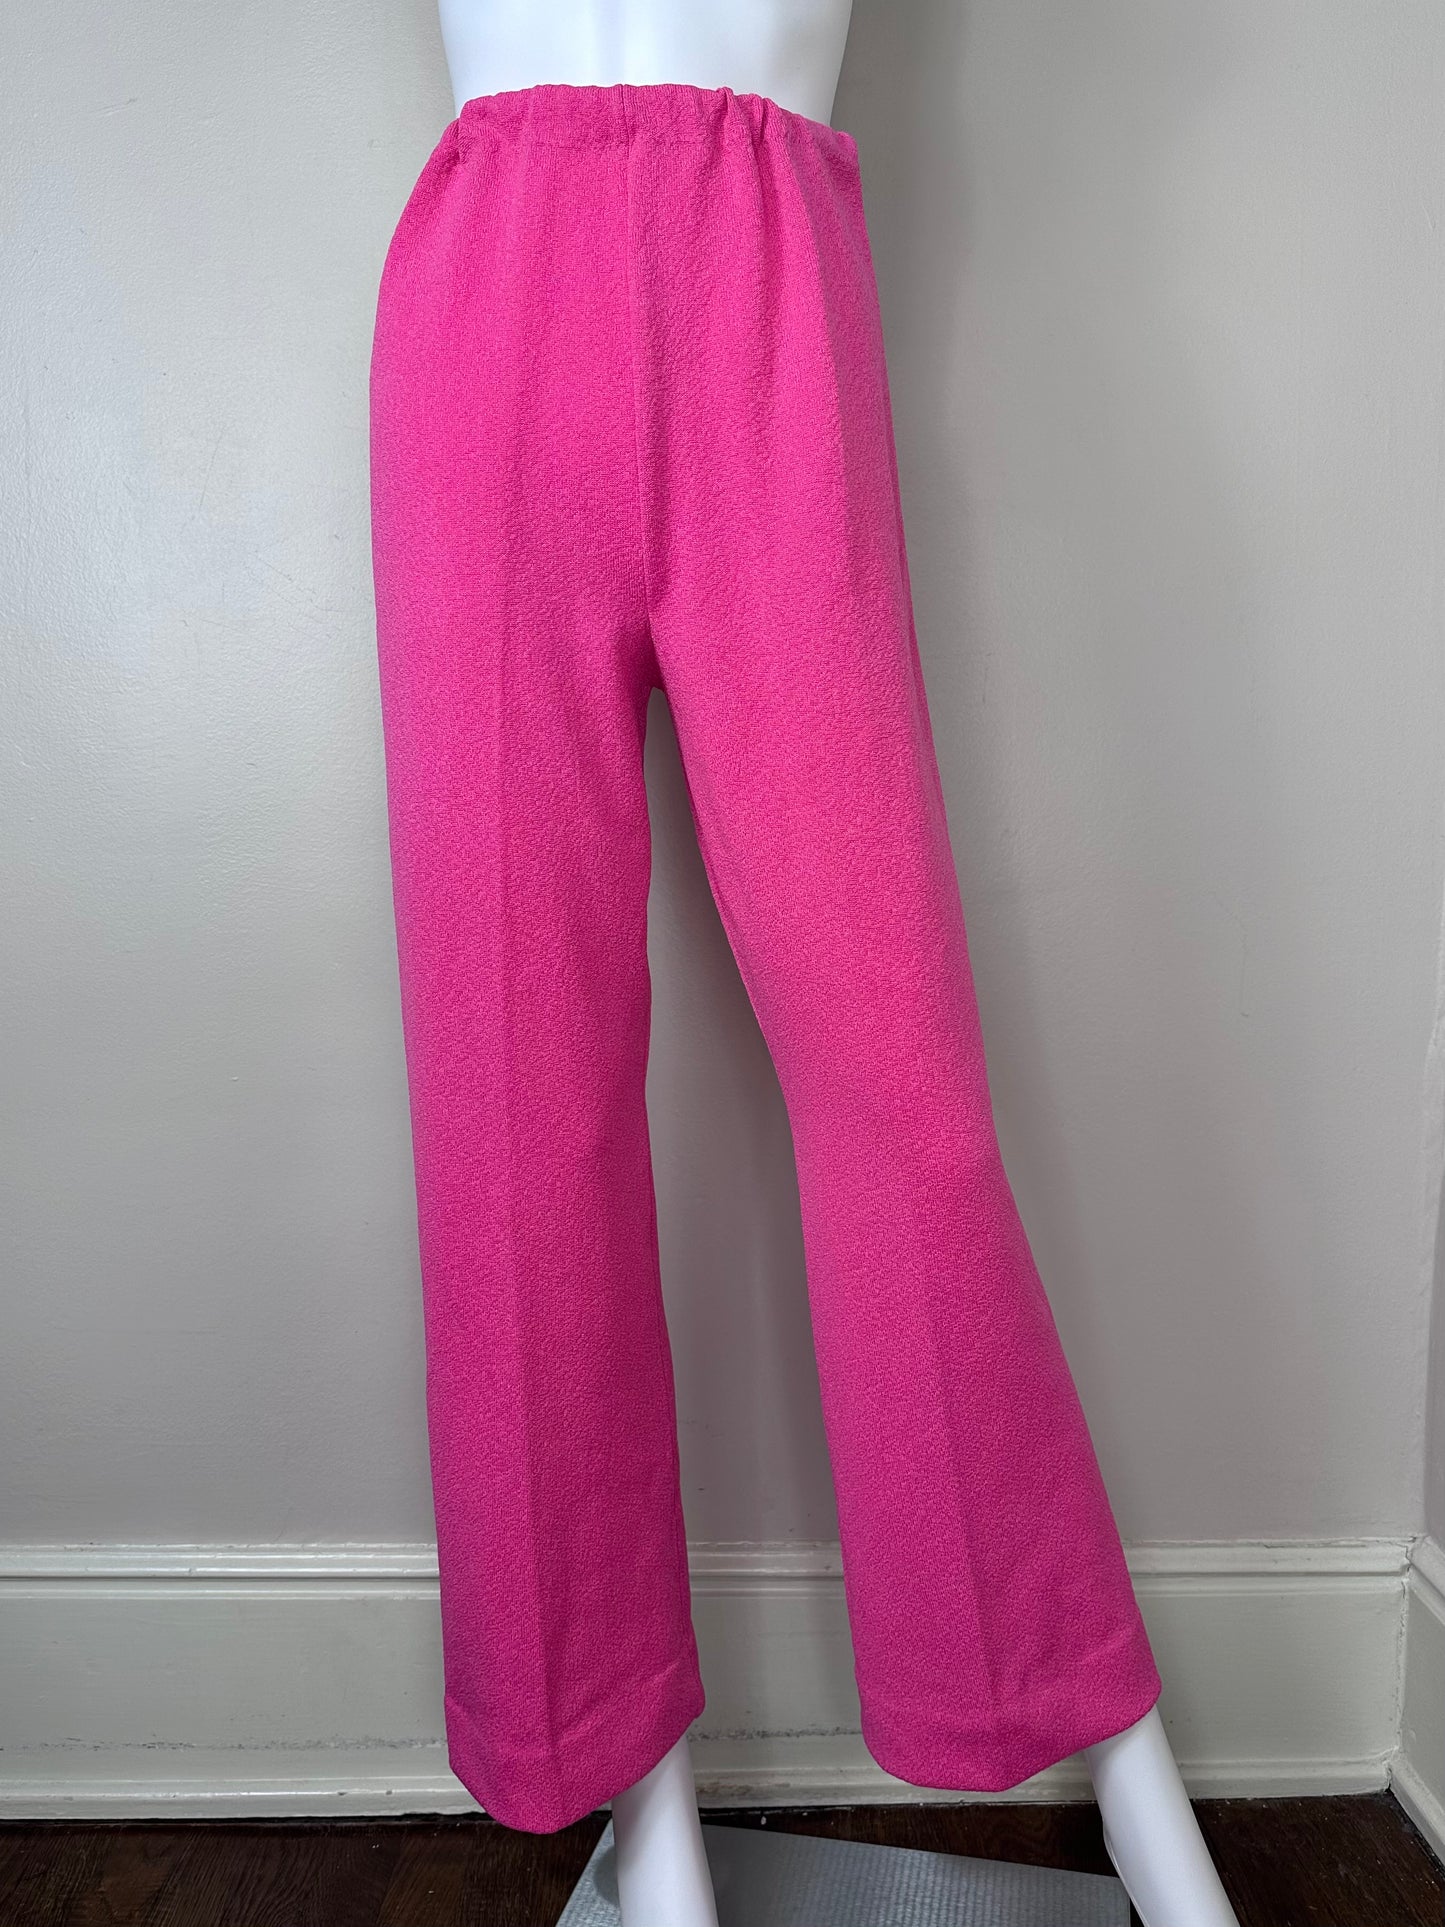 1960s/70s Bright Pink Polyester Top and Pants Set, Talbott Travler Size Small